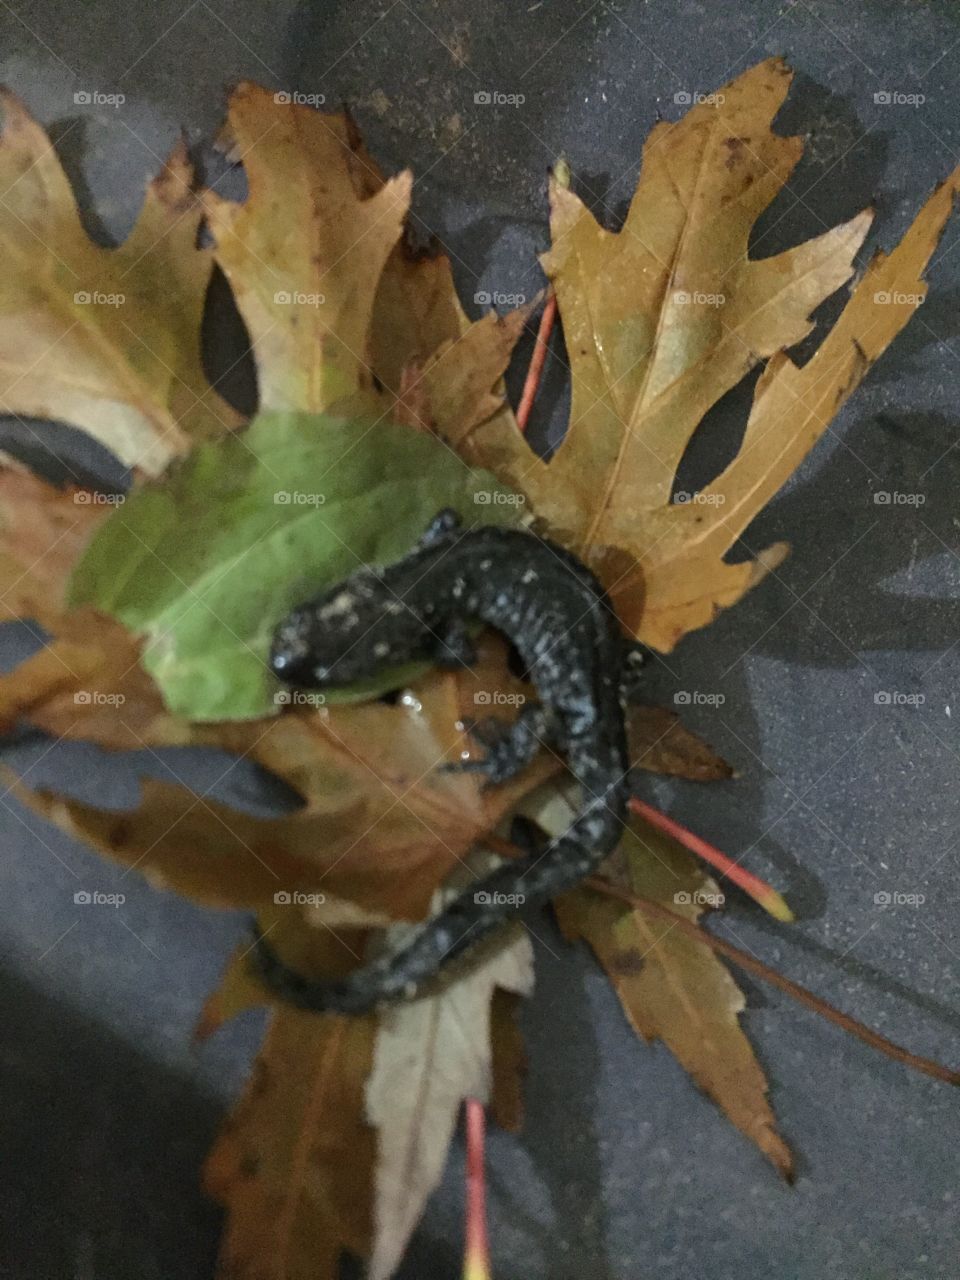 Accidentally on covering this tiny little salamander today he’s already hibernating so I thought I’d take a quick picture of them before I Tucked him back under a log.